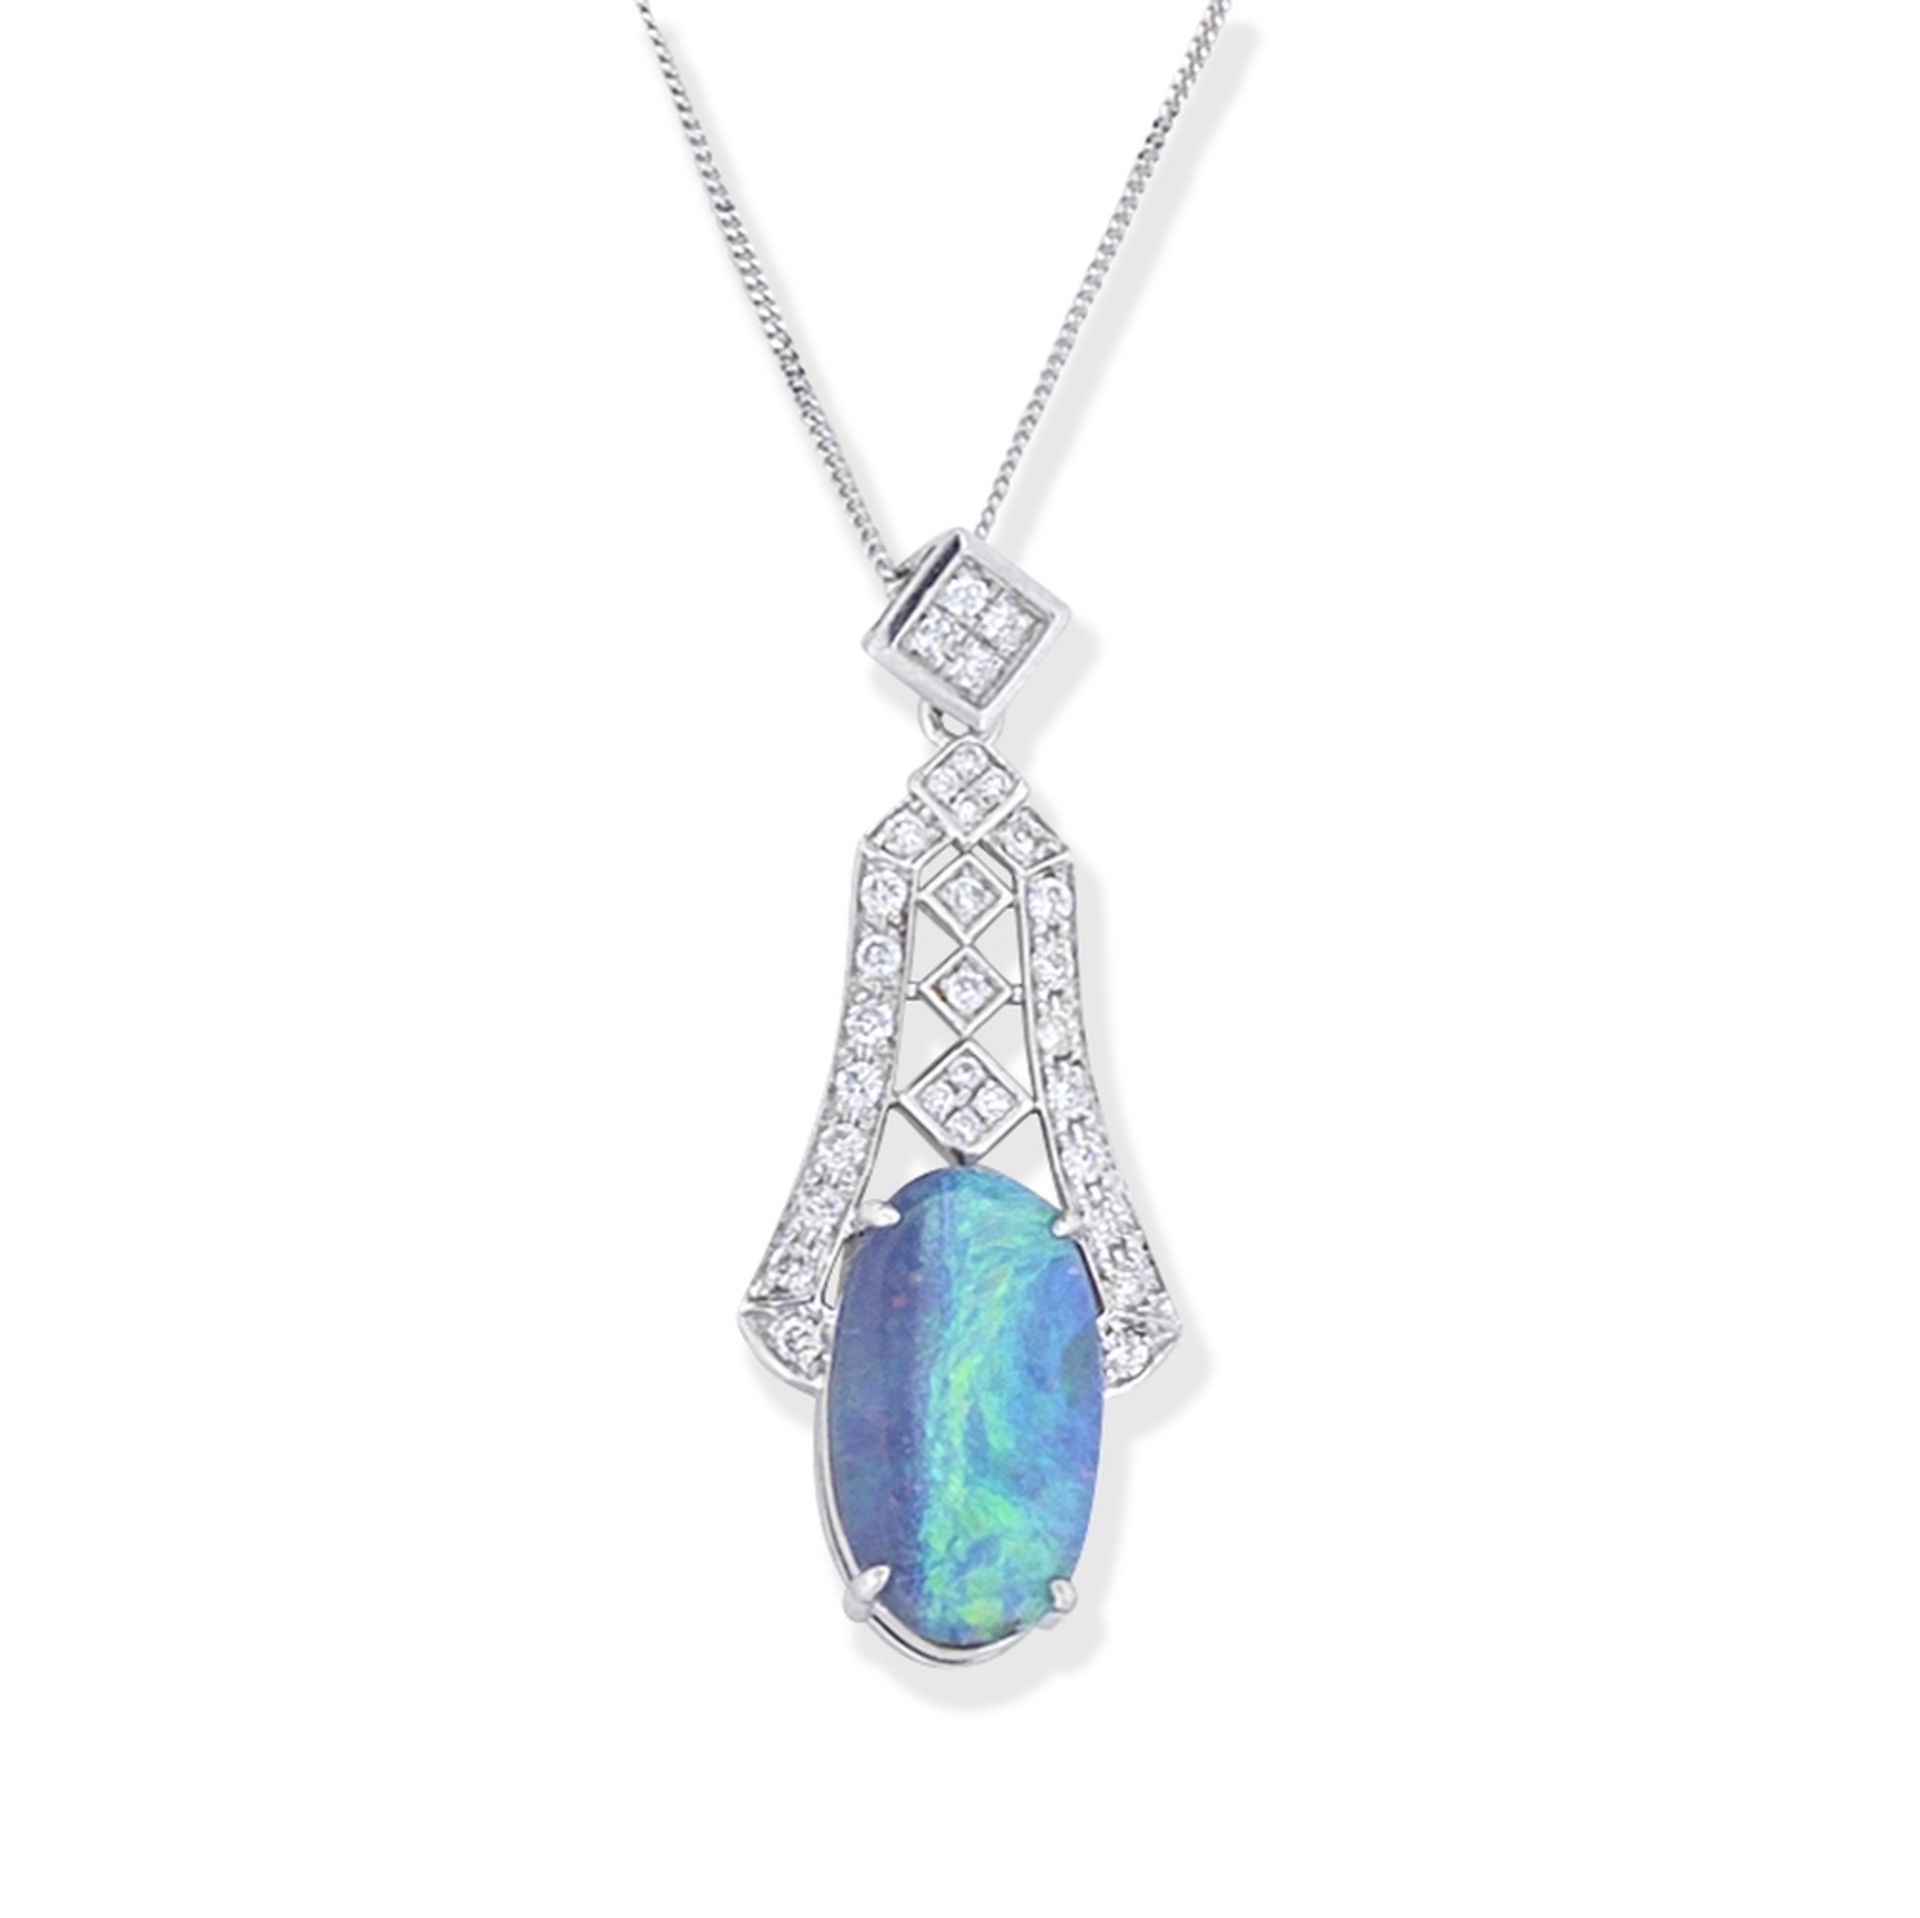 BOULDER OPAL AND DIAMOND PENDANT/NECKLACE - Image 2 of 2